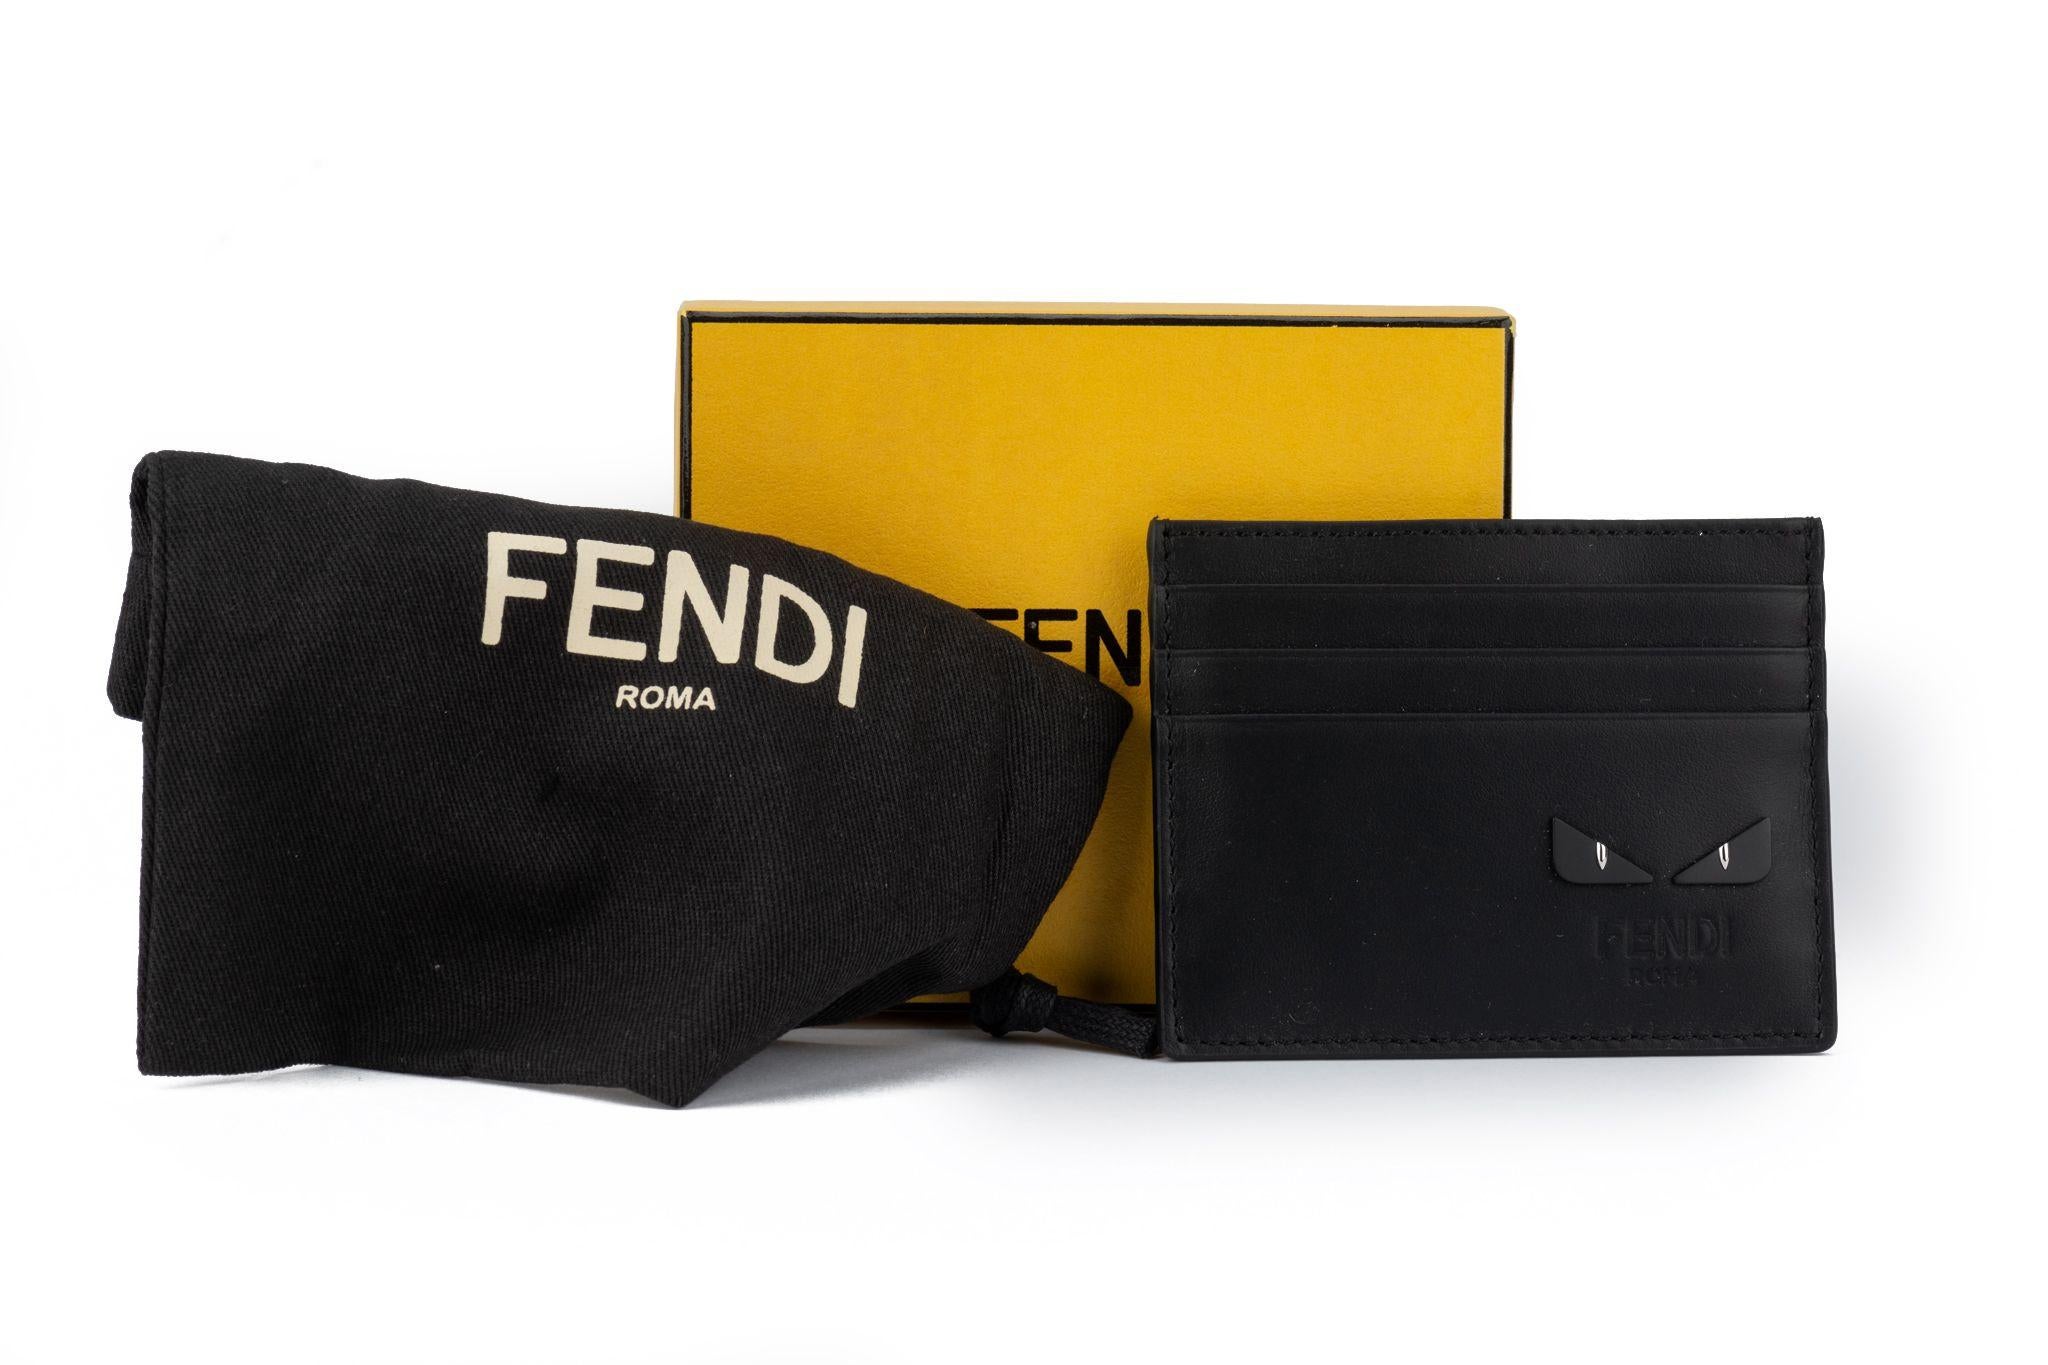 Fendi brad new limited edition matte black credit card monster case with gold eyes. Comes with original dust cover.